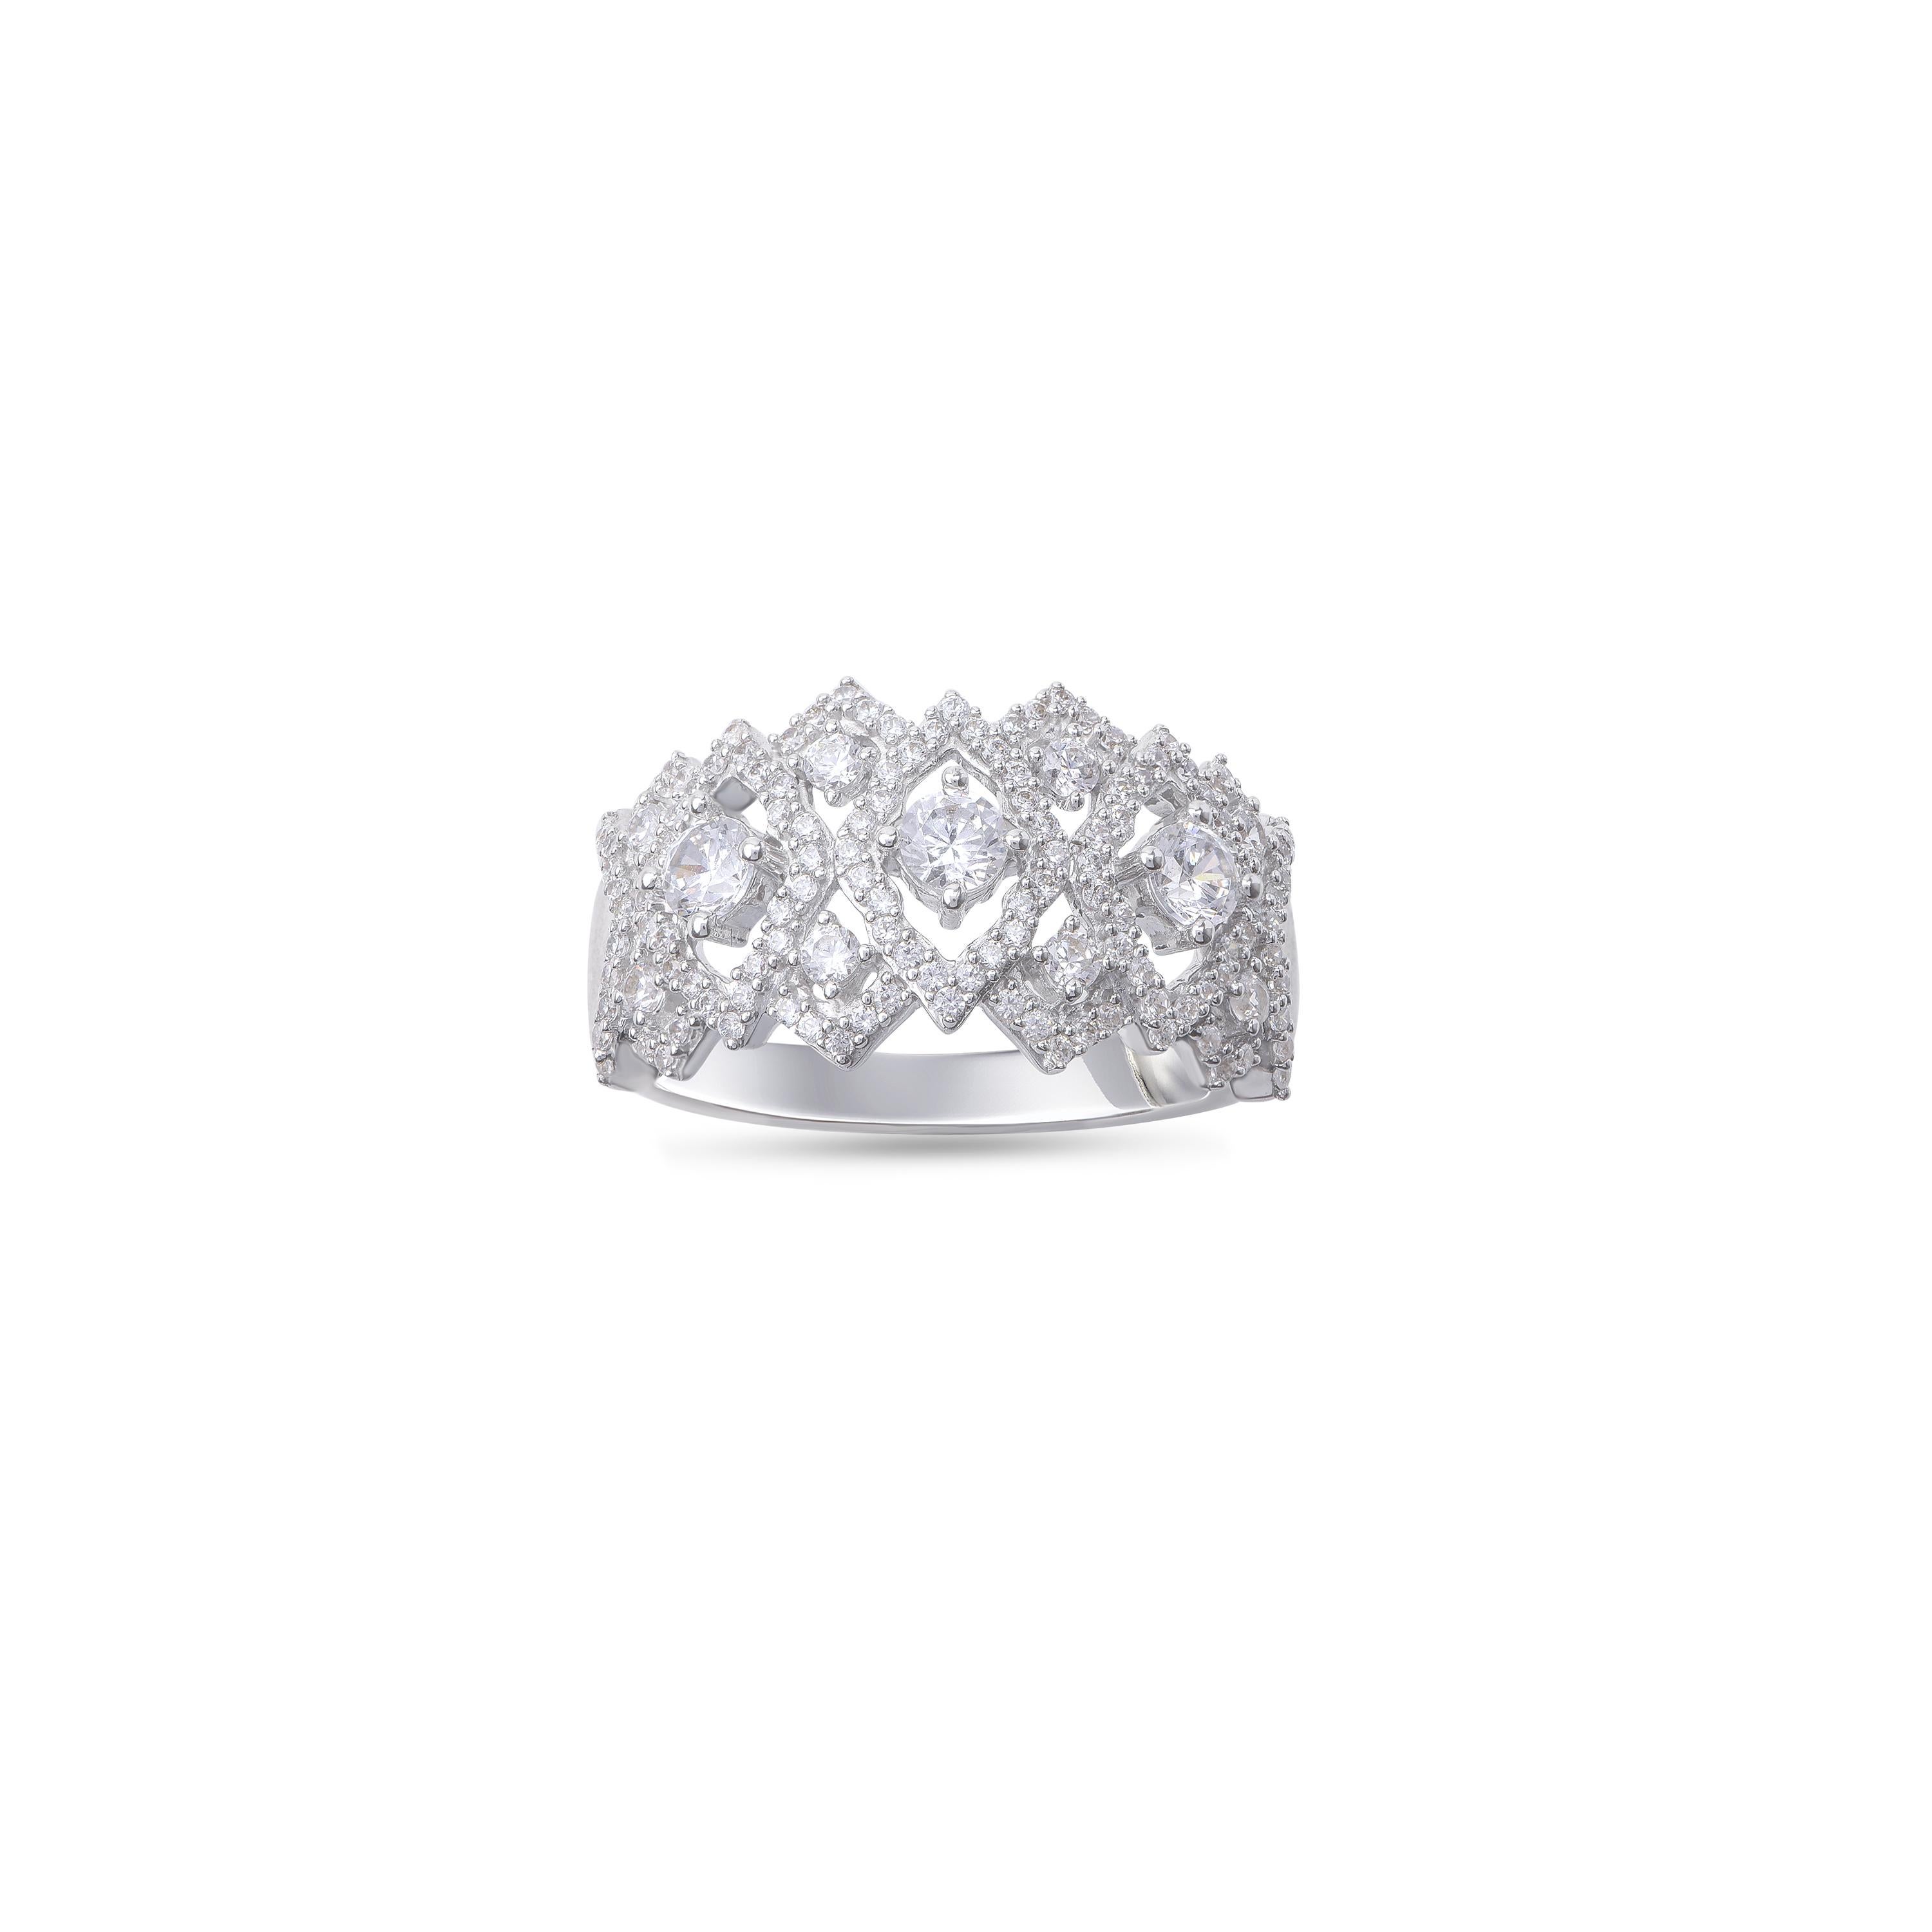 Honor your special day with this exceptional diamond band ring. This band ring features a sparkling 137 brilliant cut and single cut round diamonds beautifully set in prong setting. The total diamond weight is 1.0 Carat. The diamonds are graded as